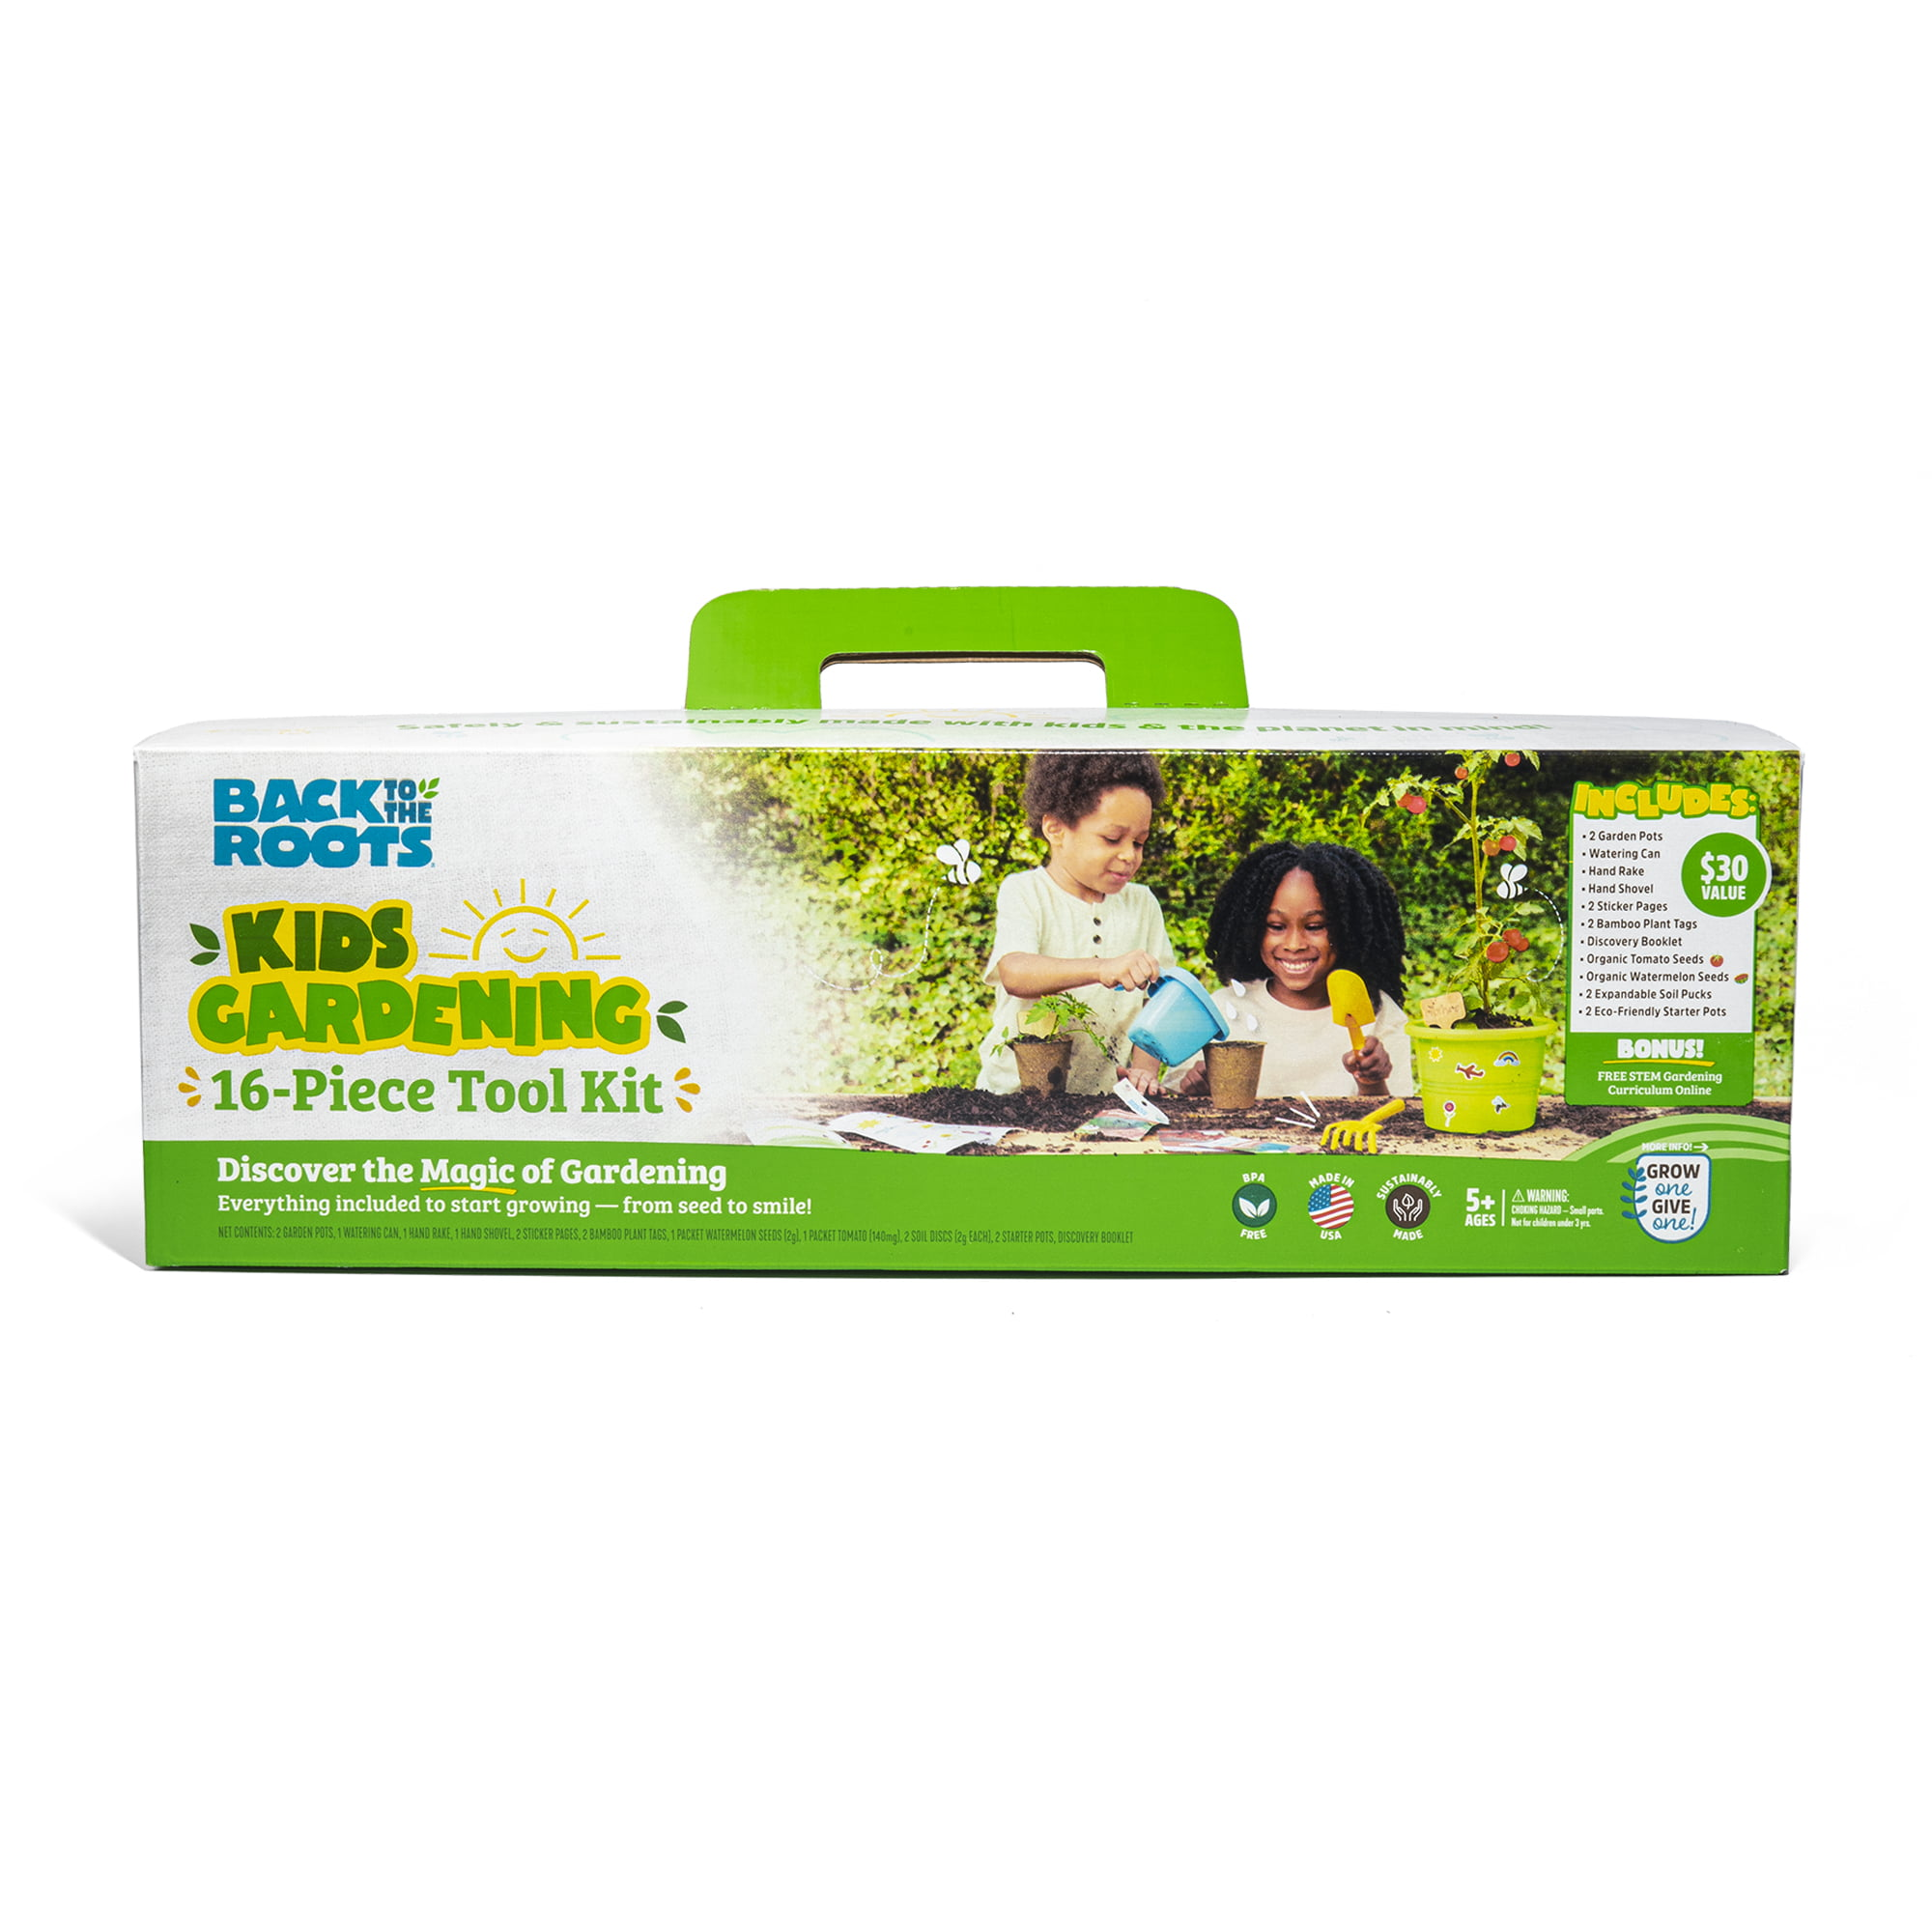 Back to the Roots Kids' Gardening Tool Kit with Organic Seeds, 16 Piece Set - Walmart.com $11.00